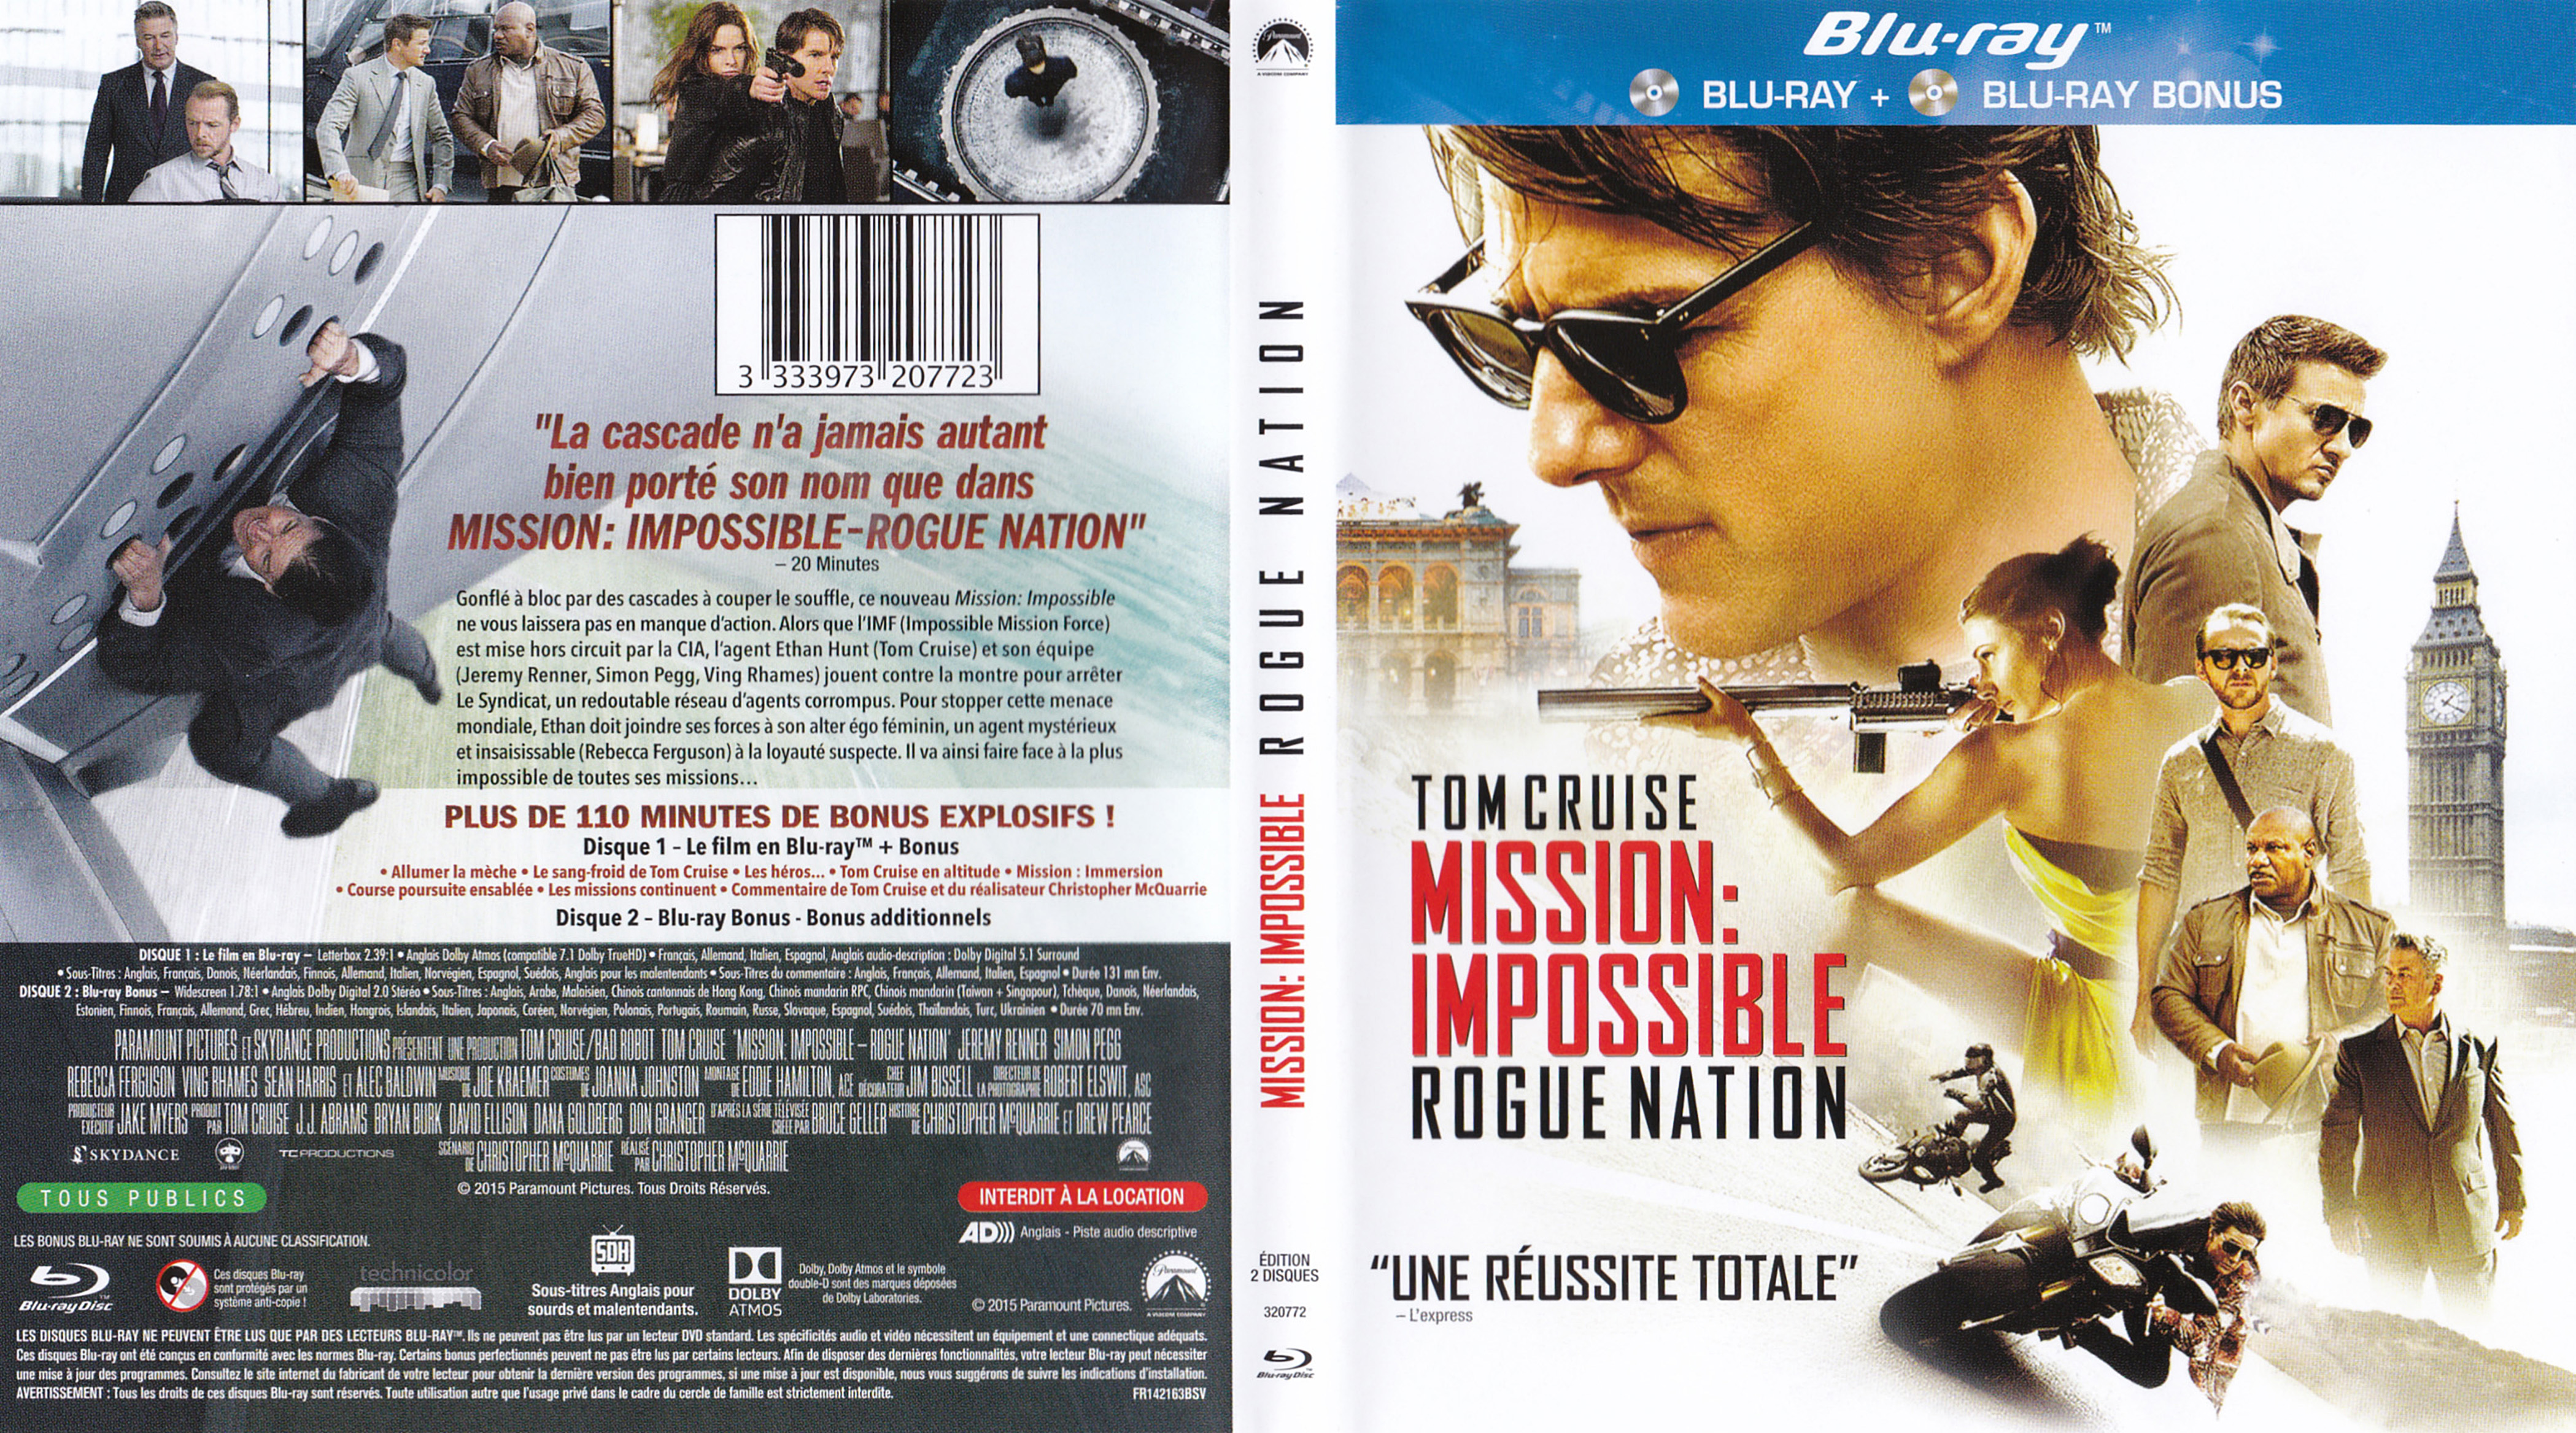 Jaquette DVD Mission : Impossible Rogue Nation (BLU-RAY) v2